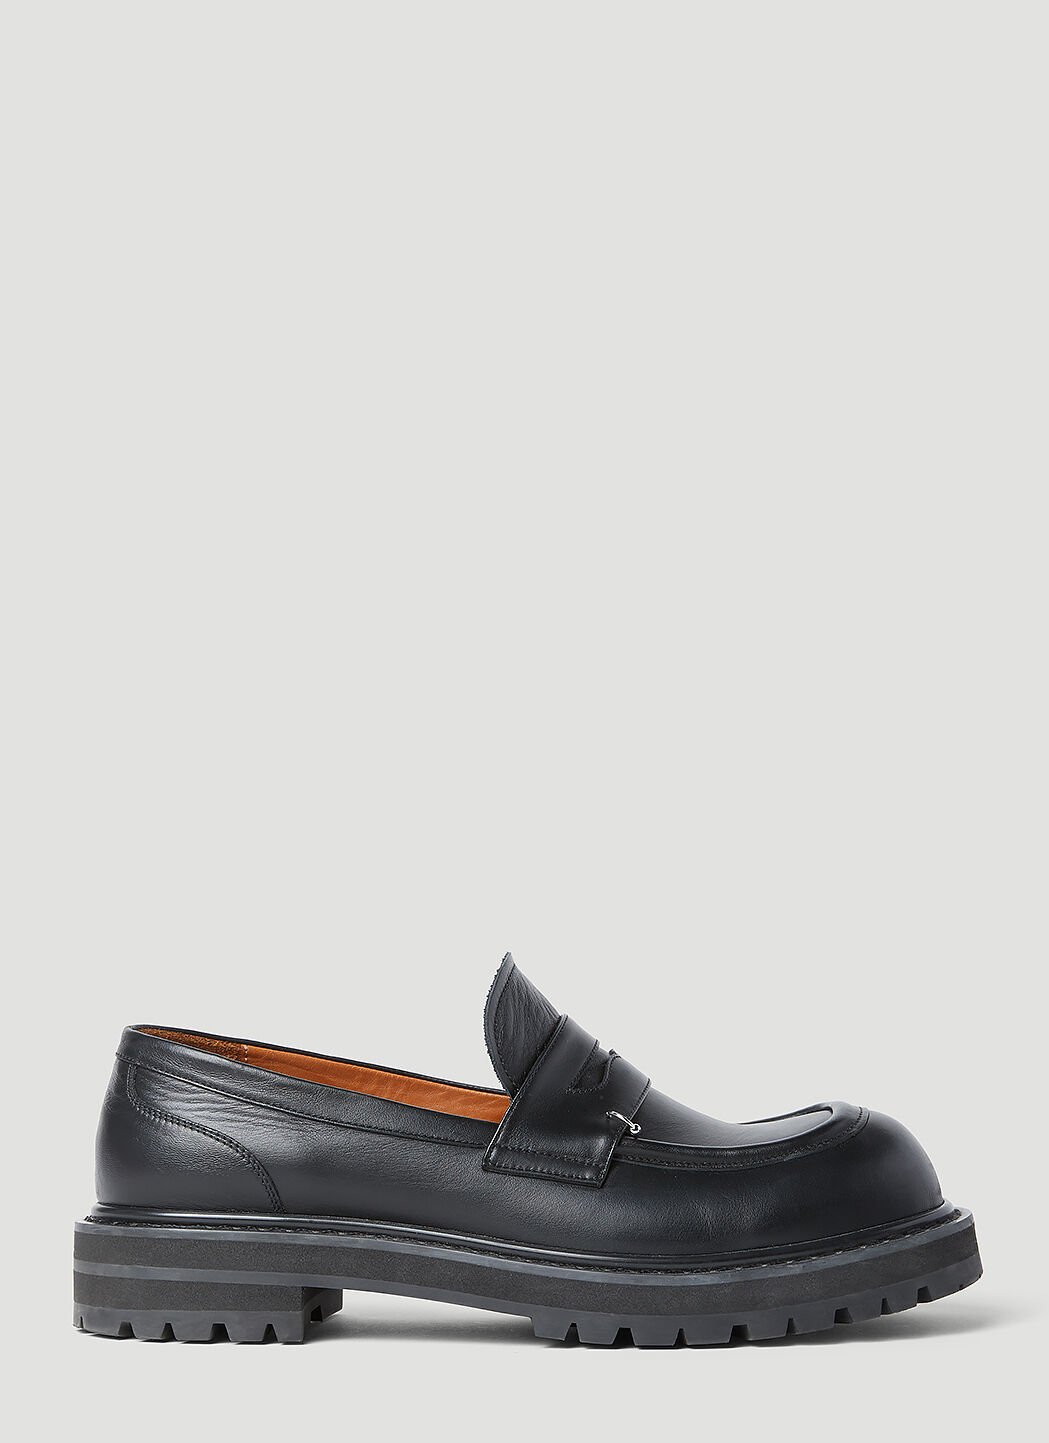 Thom Browne Pierced Leather Loafers Black thb0155012